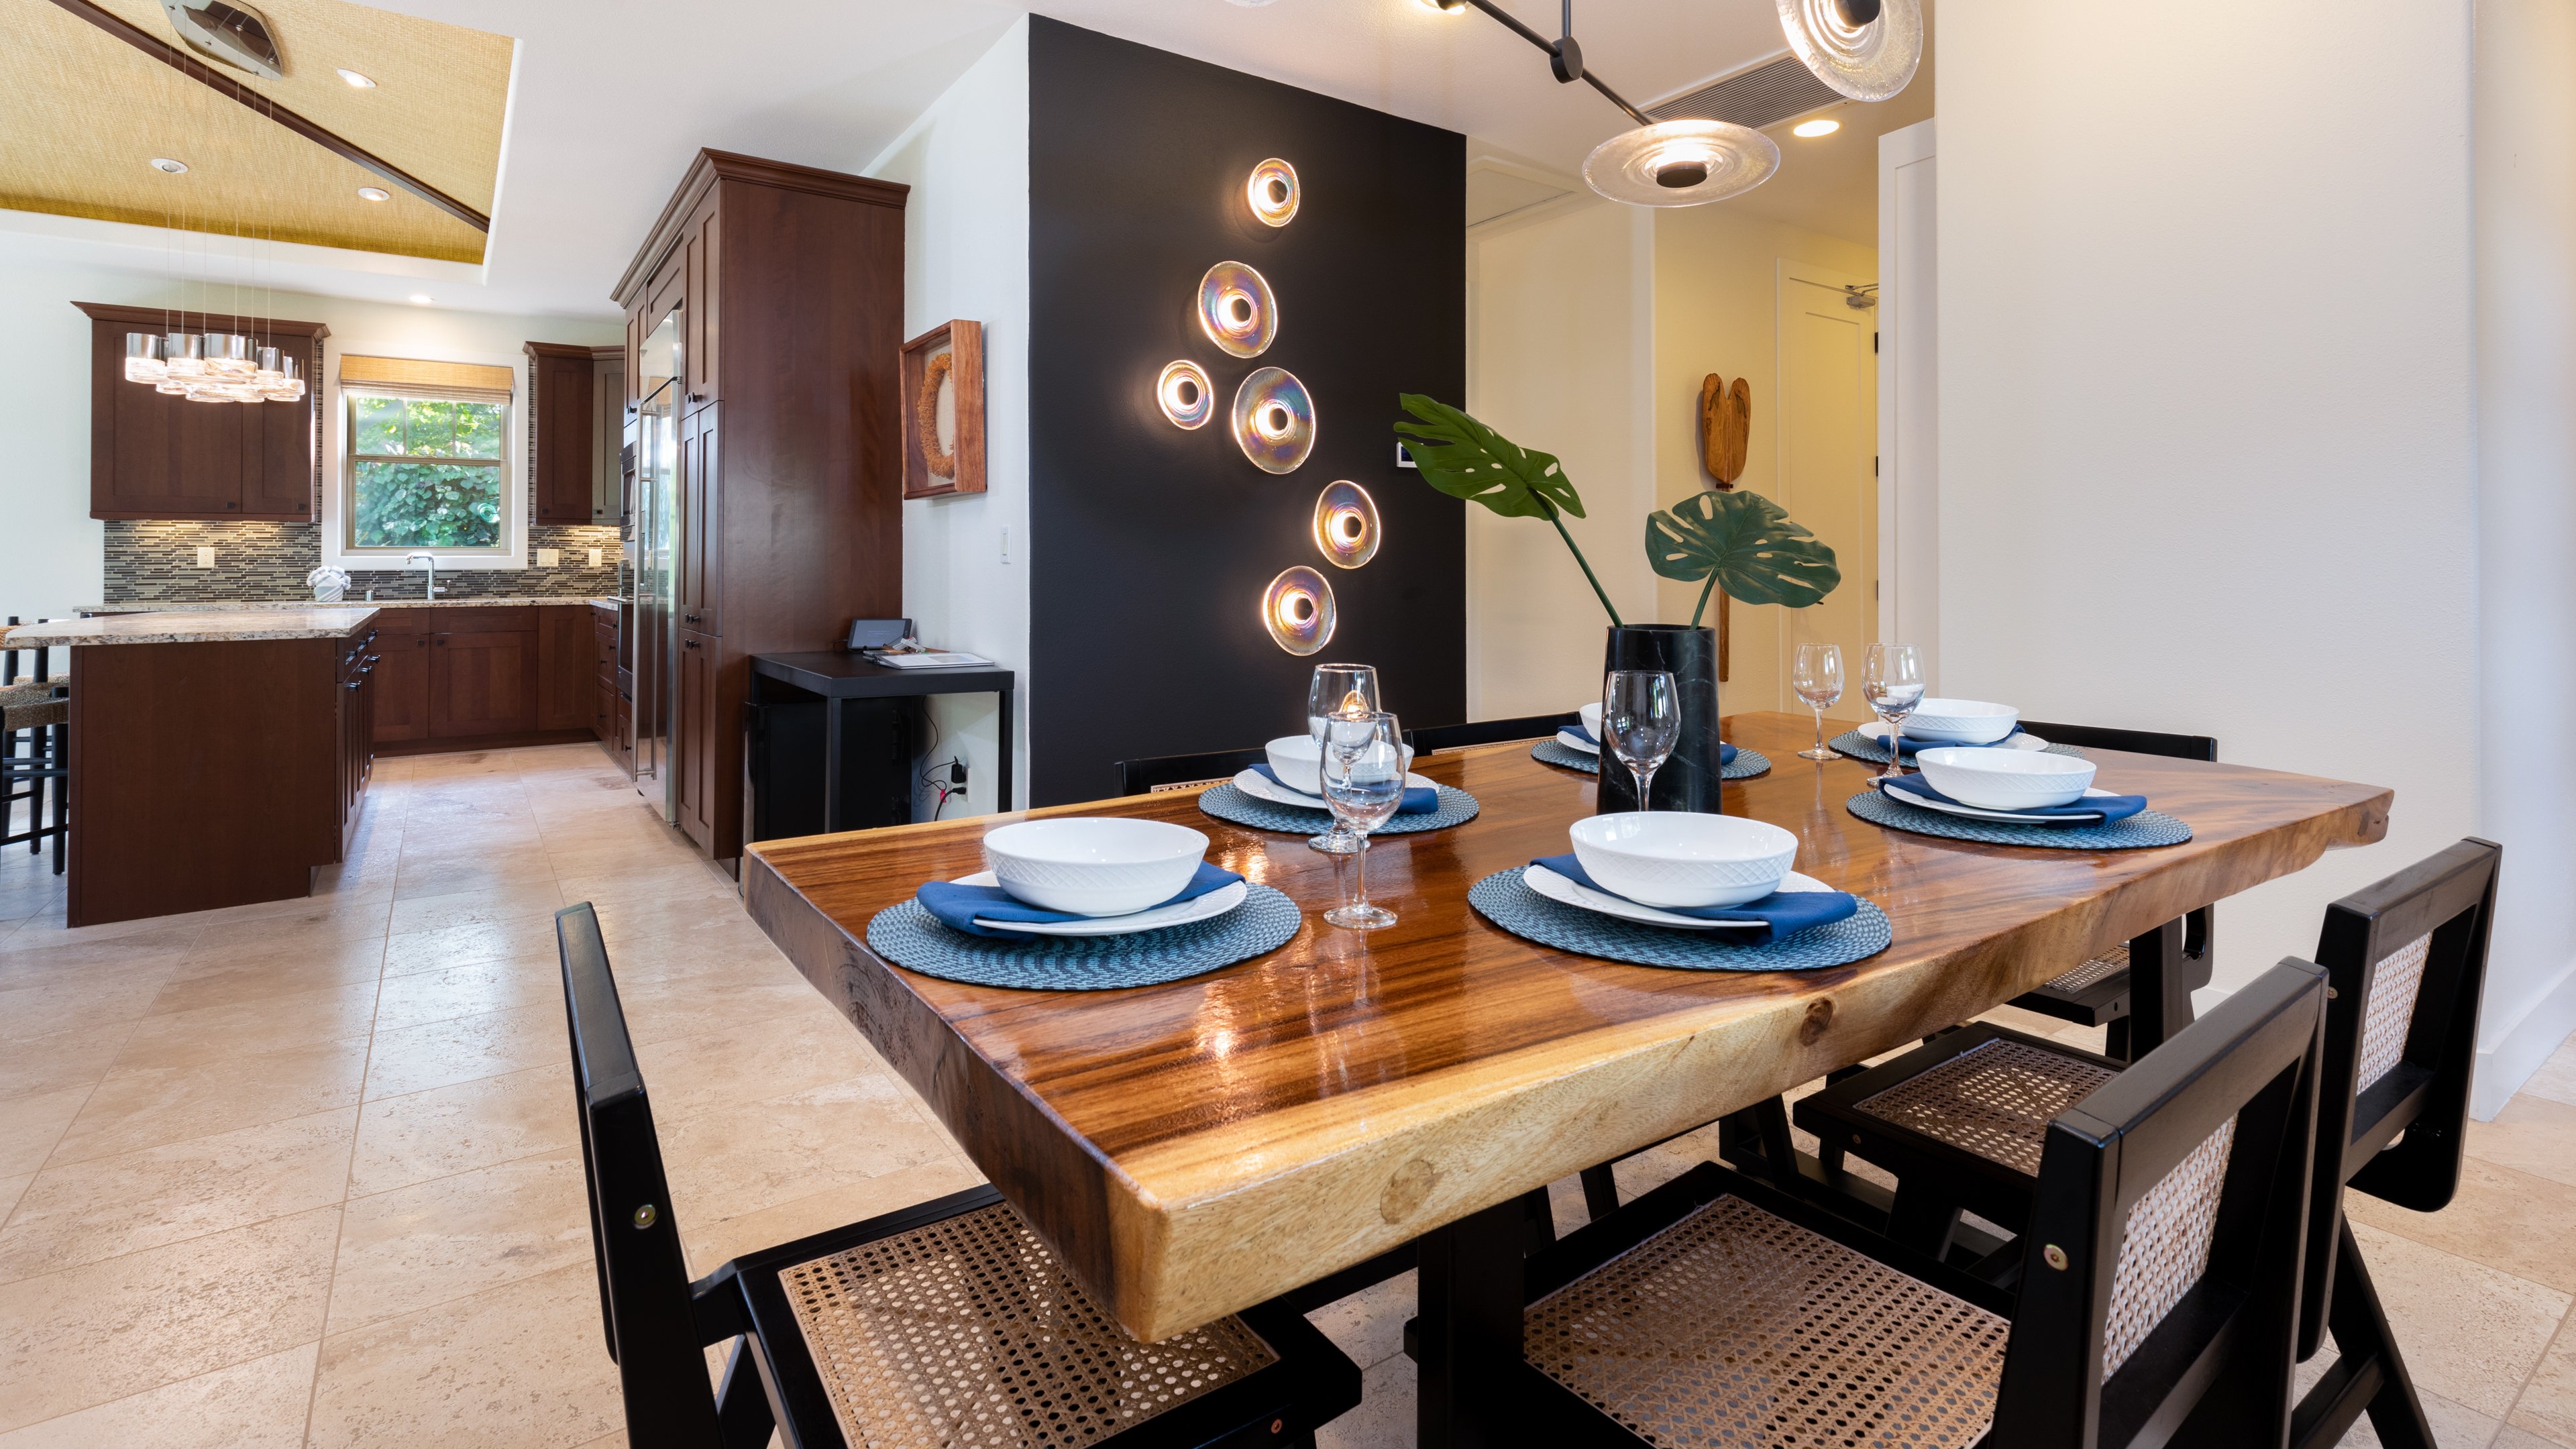 Stylish dining area with seating for 6